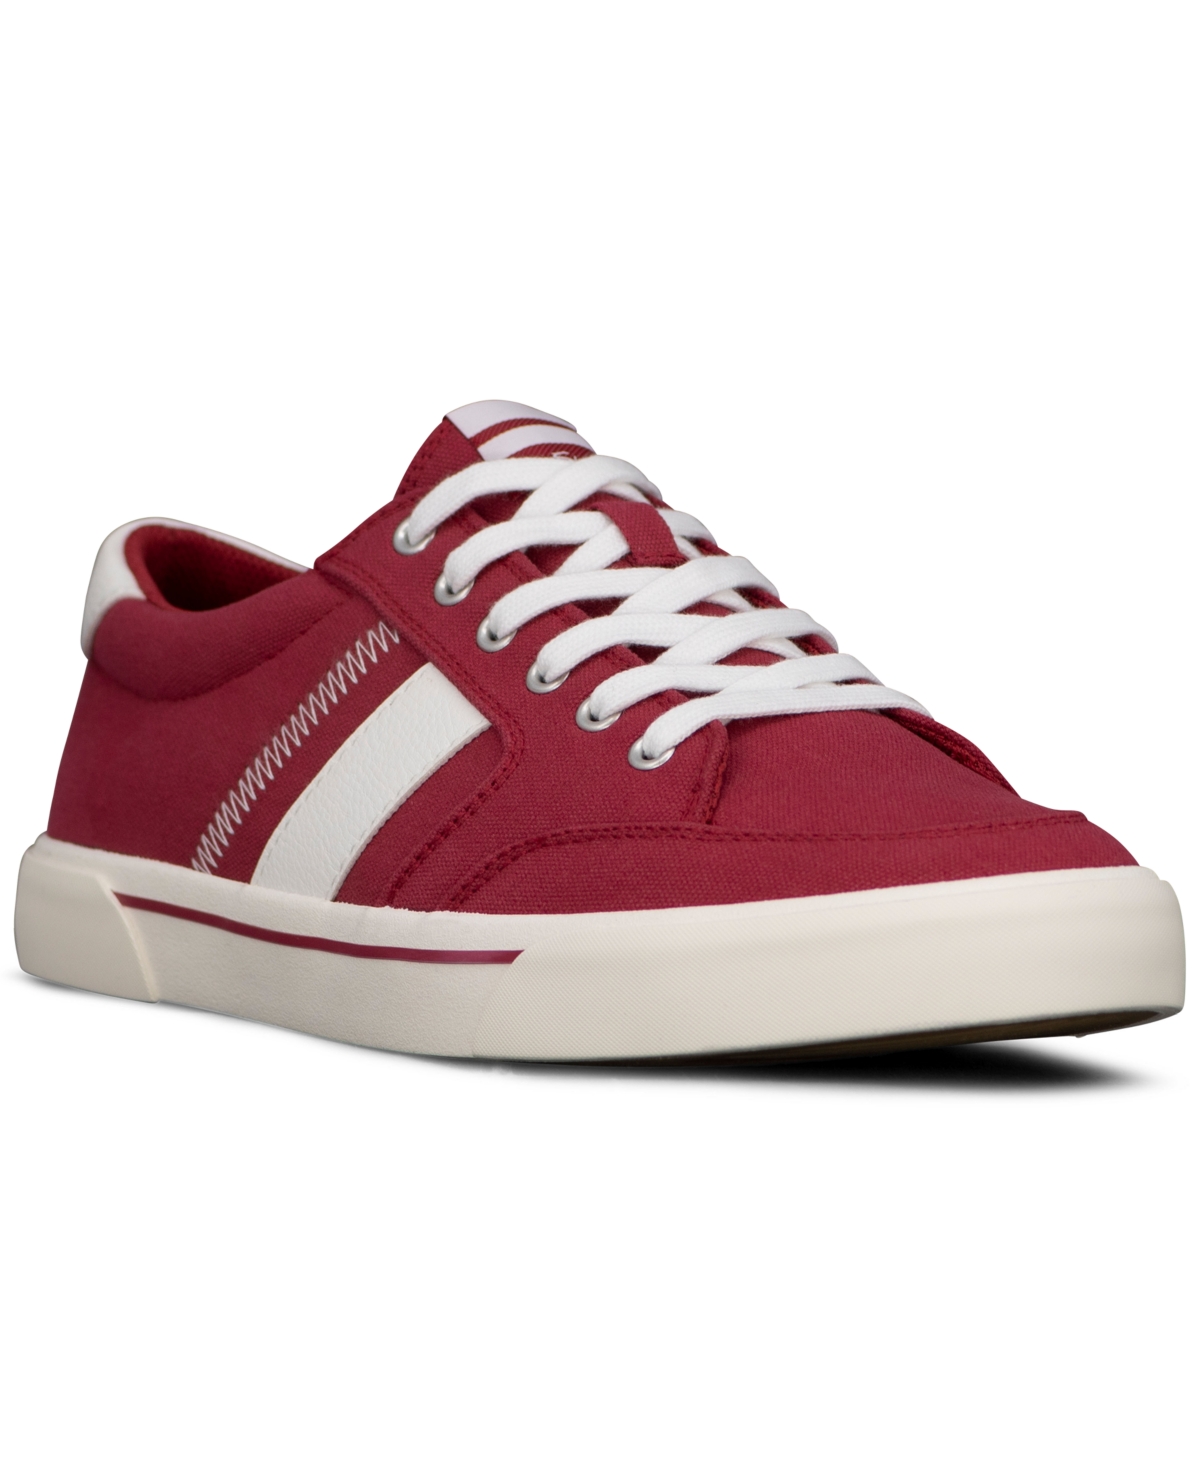 Shop Ben Sherman Men's Hawthorn Low Canvas Casual Sneakers From Finish Line In Red,white